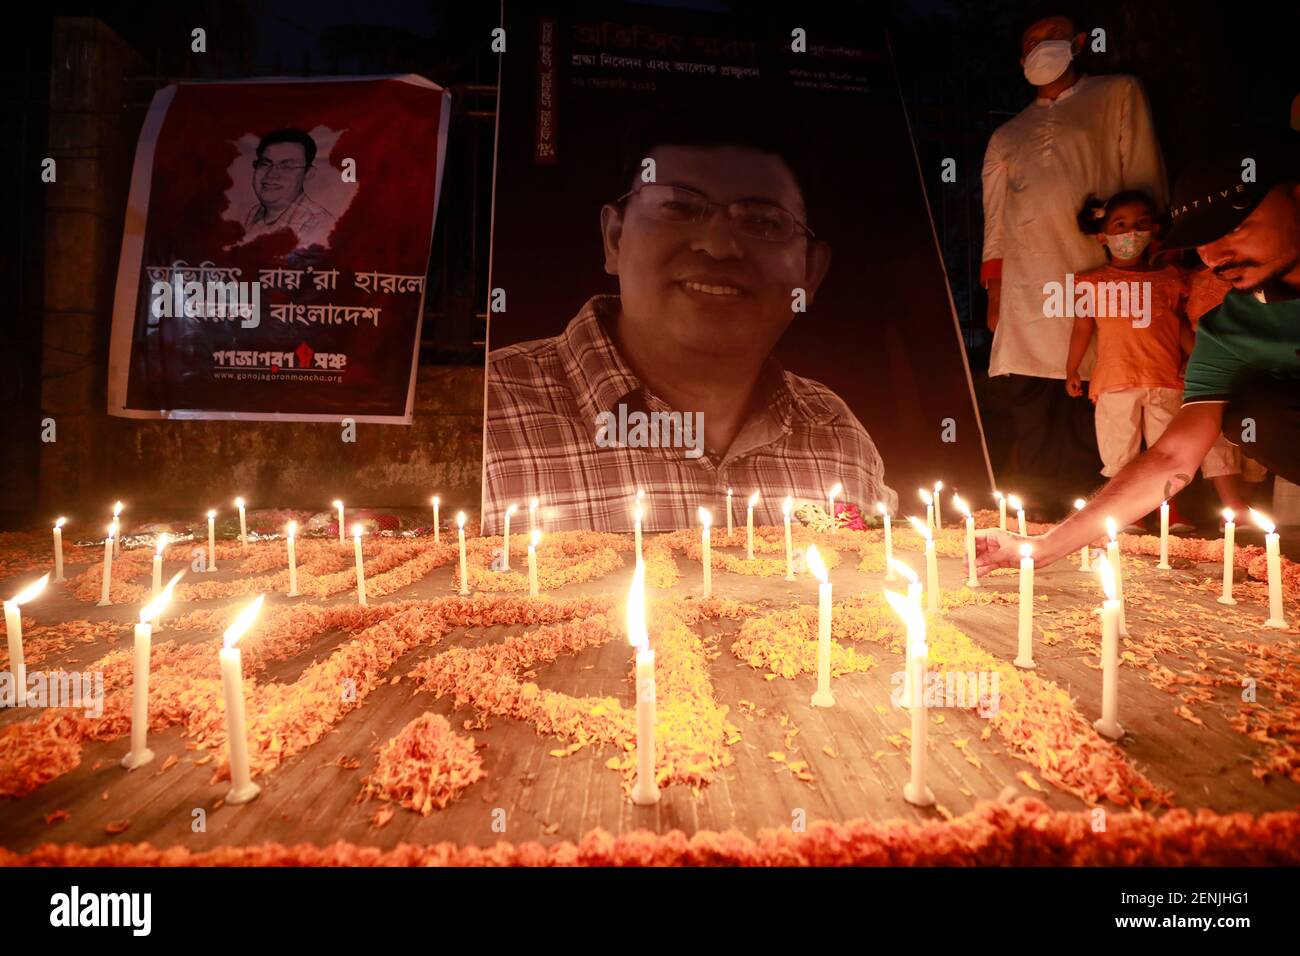 Dhaka, Bangladesh - February 26, 2021: People gather in Dhaka to lighting a candle remembering the murder of the Bangladeshi American blogger, writer Stock Photo